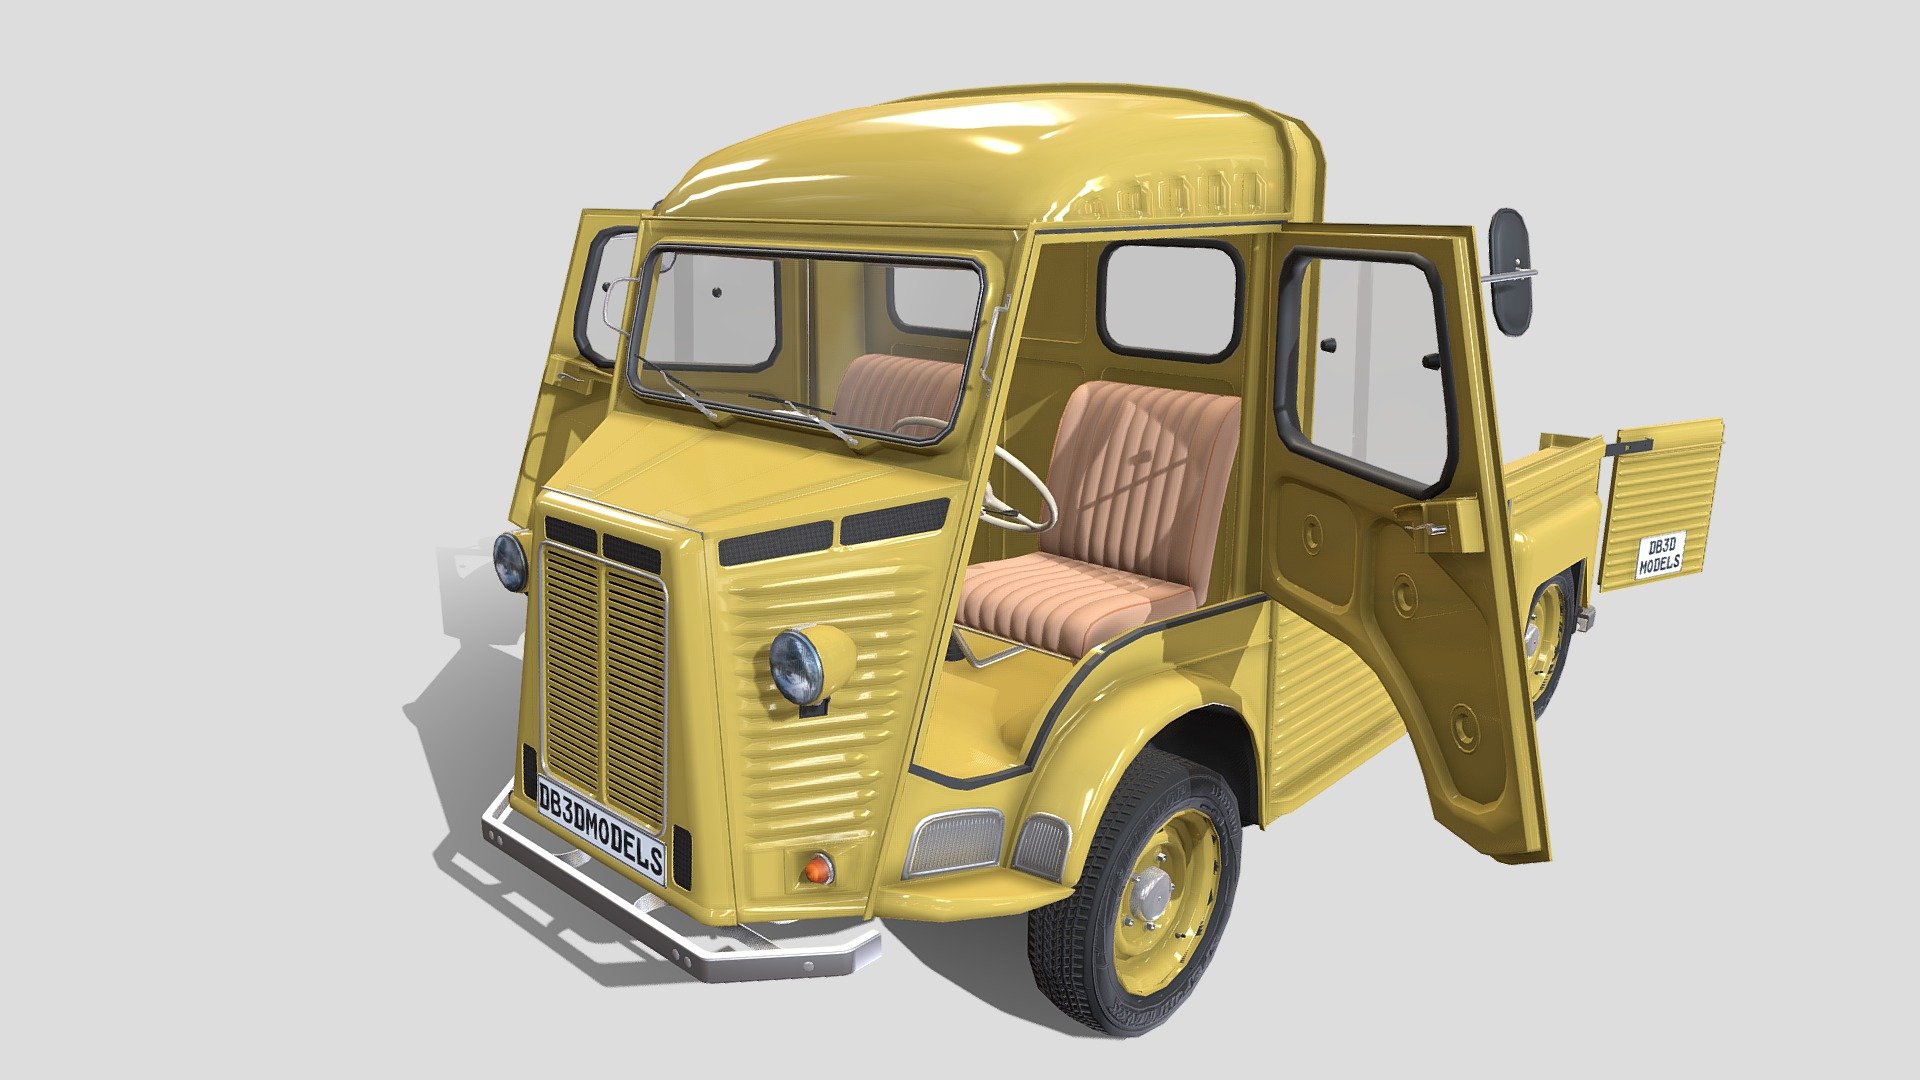 Highly detailed Generic 40s Van 3D model rendered with Cycles in Blender, as per seen on attached images.

The model is very intricately built, it has the interior modeled, with the rear cargo area, and a simple underbody built as well. 

The 3d model is scaled to original size in Blender.

File formats:

-.blend, rendered with cycles, as seen in the images;

-.blend, rendered with cycles, as seen in the images, with doors open;

-.obj, with materials applied;

-.obj, with materials applied, with doors open;

-.dae, with materials applied;

-.dae, with materials applied, with doors open;

-.fbx, with materials applied;

-.fbx, with materials applied, with doors open;

-.stl;

-.stl, with doors open;

Files come named appropriately and split by file format.

3D Software:

The 3D model was originally created in Blender 3.1 and rendered with Cycles 3d model